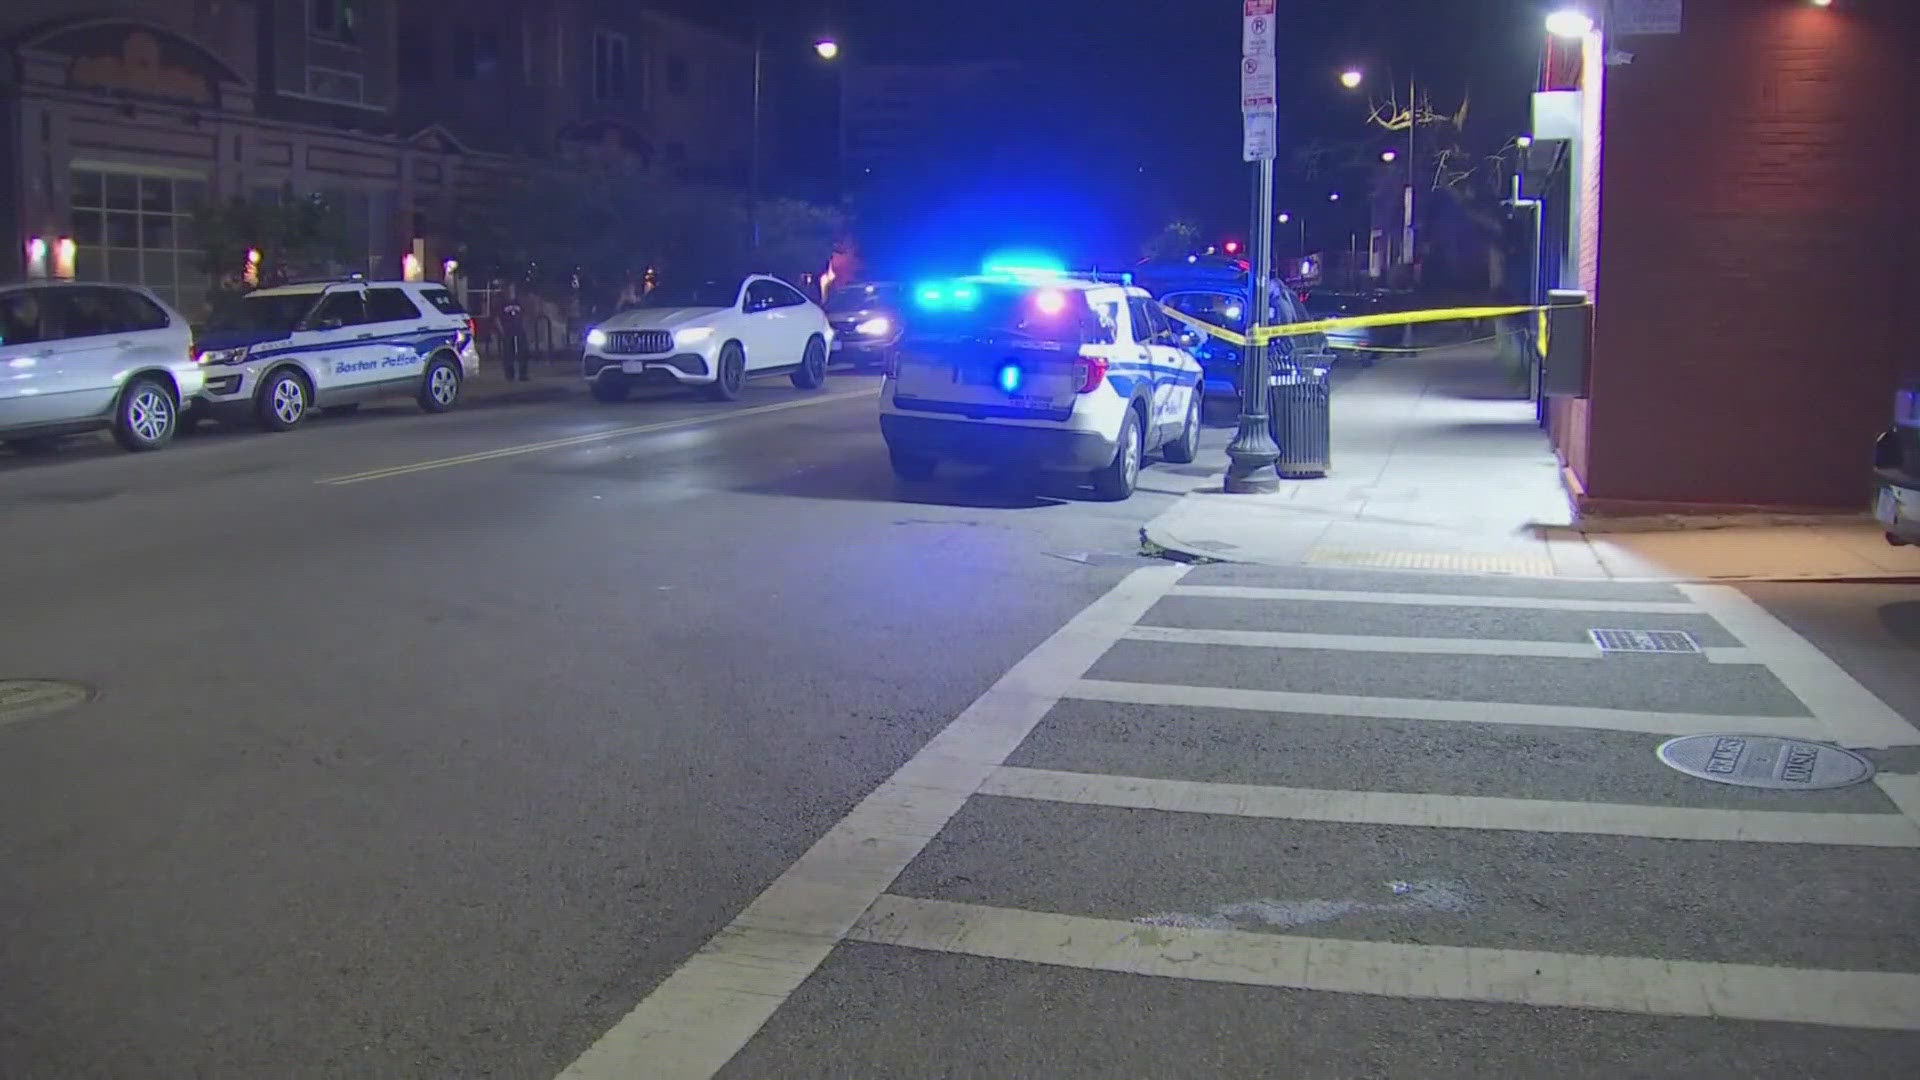 The shooting happened Wednesday night as a crowd was gathered in the city’s Dorchester section.